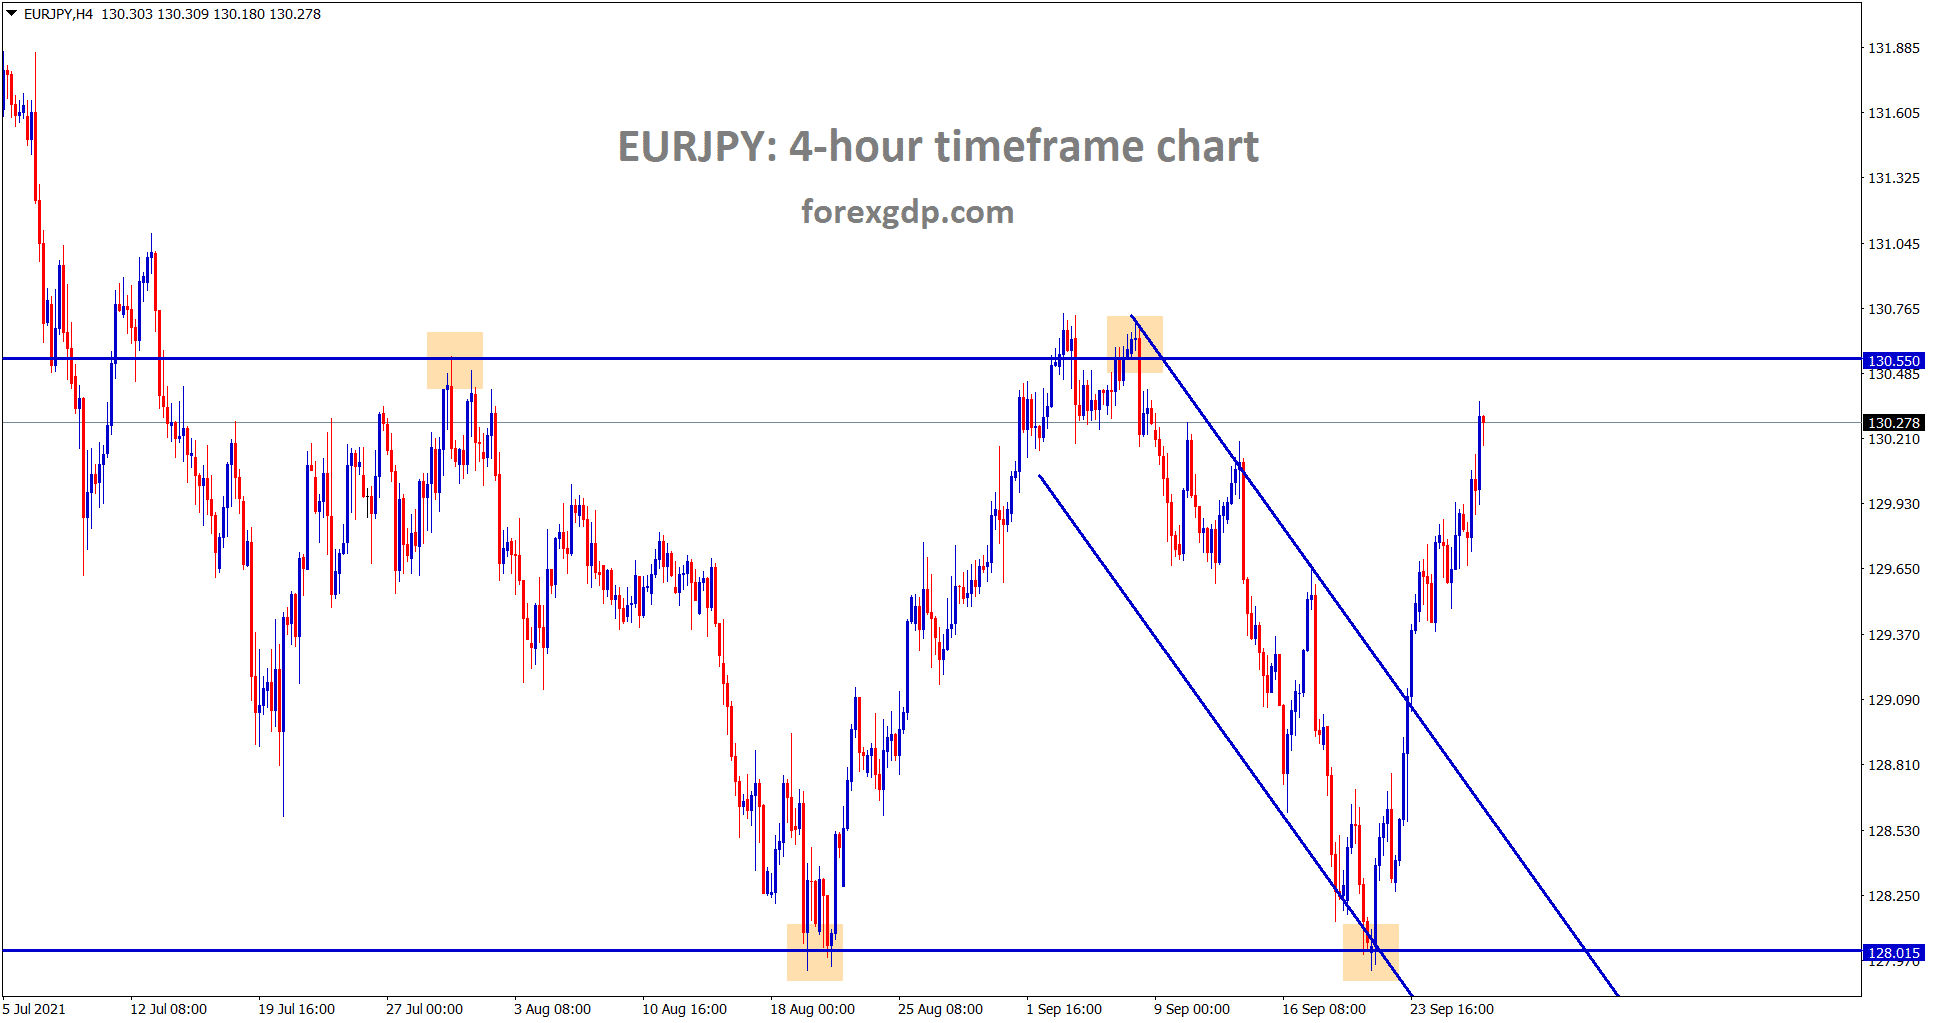 EURJPY is moving up continuously after breaking the descending channel